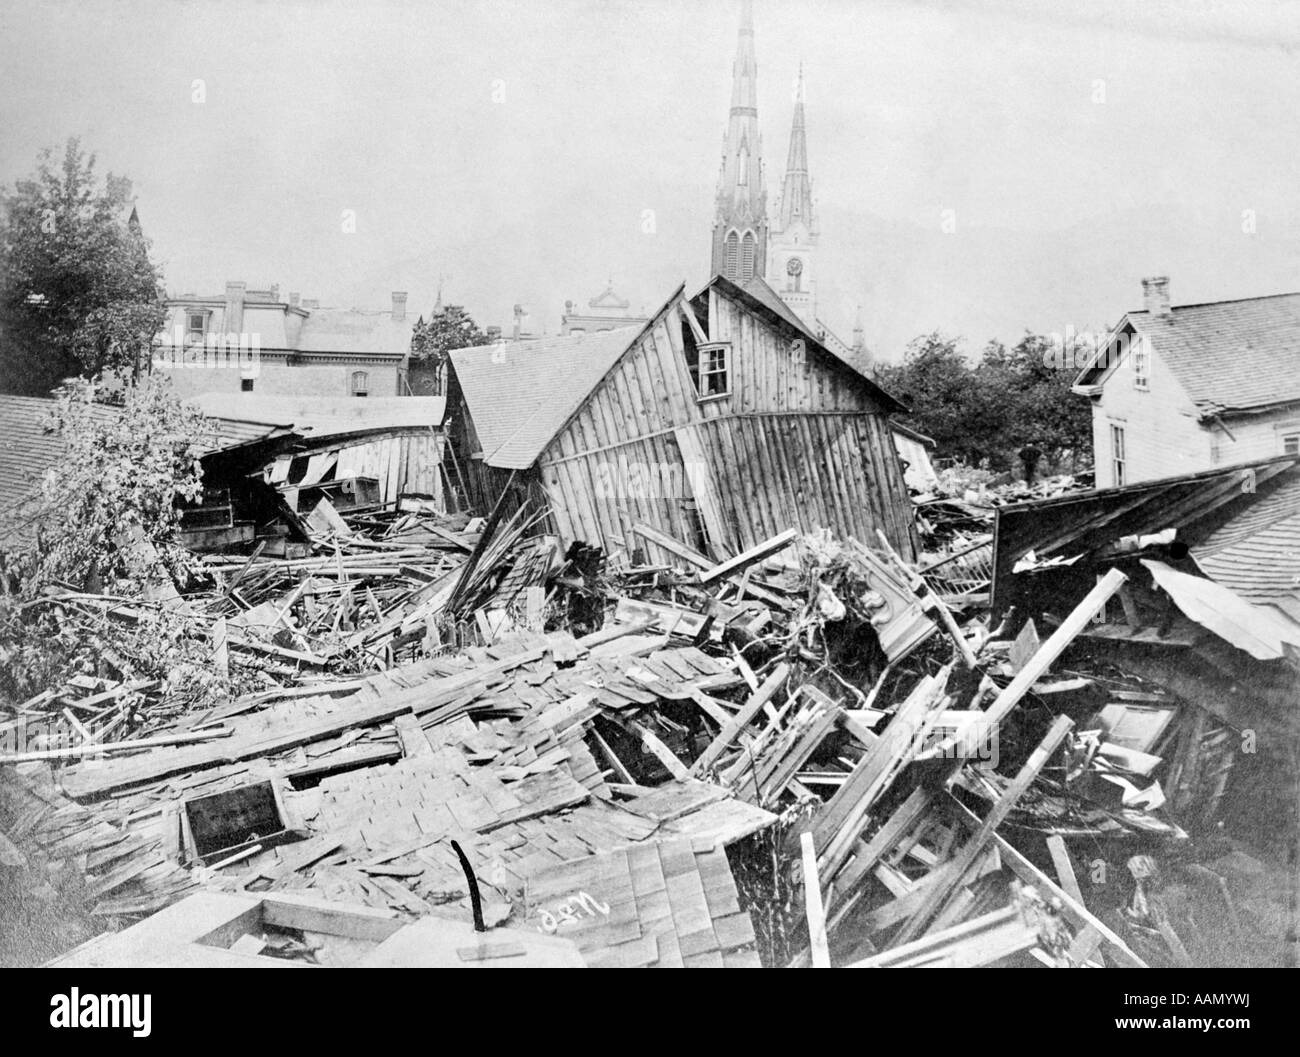 MAY 31 1889 PHOTO RUINS WOODED BUILDINGS HOUSES DEBRIS FROM JOHNSTOWN FLOOD PENNSYLVANIA FLOODS DISASTER TRAGEDY DEVASTATION Stock Photo